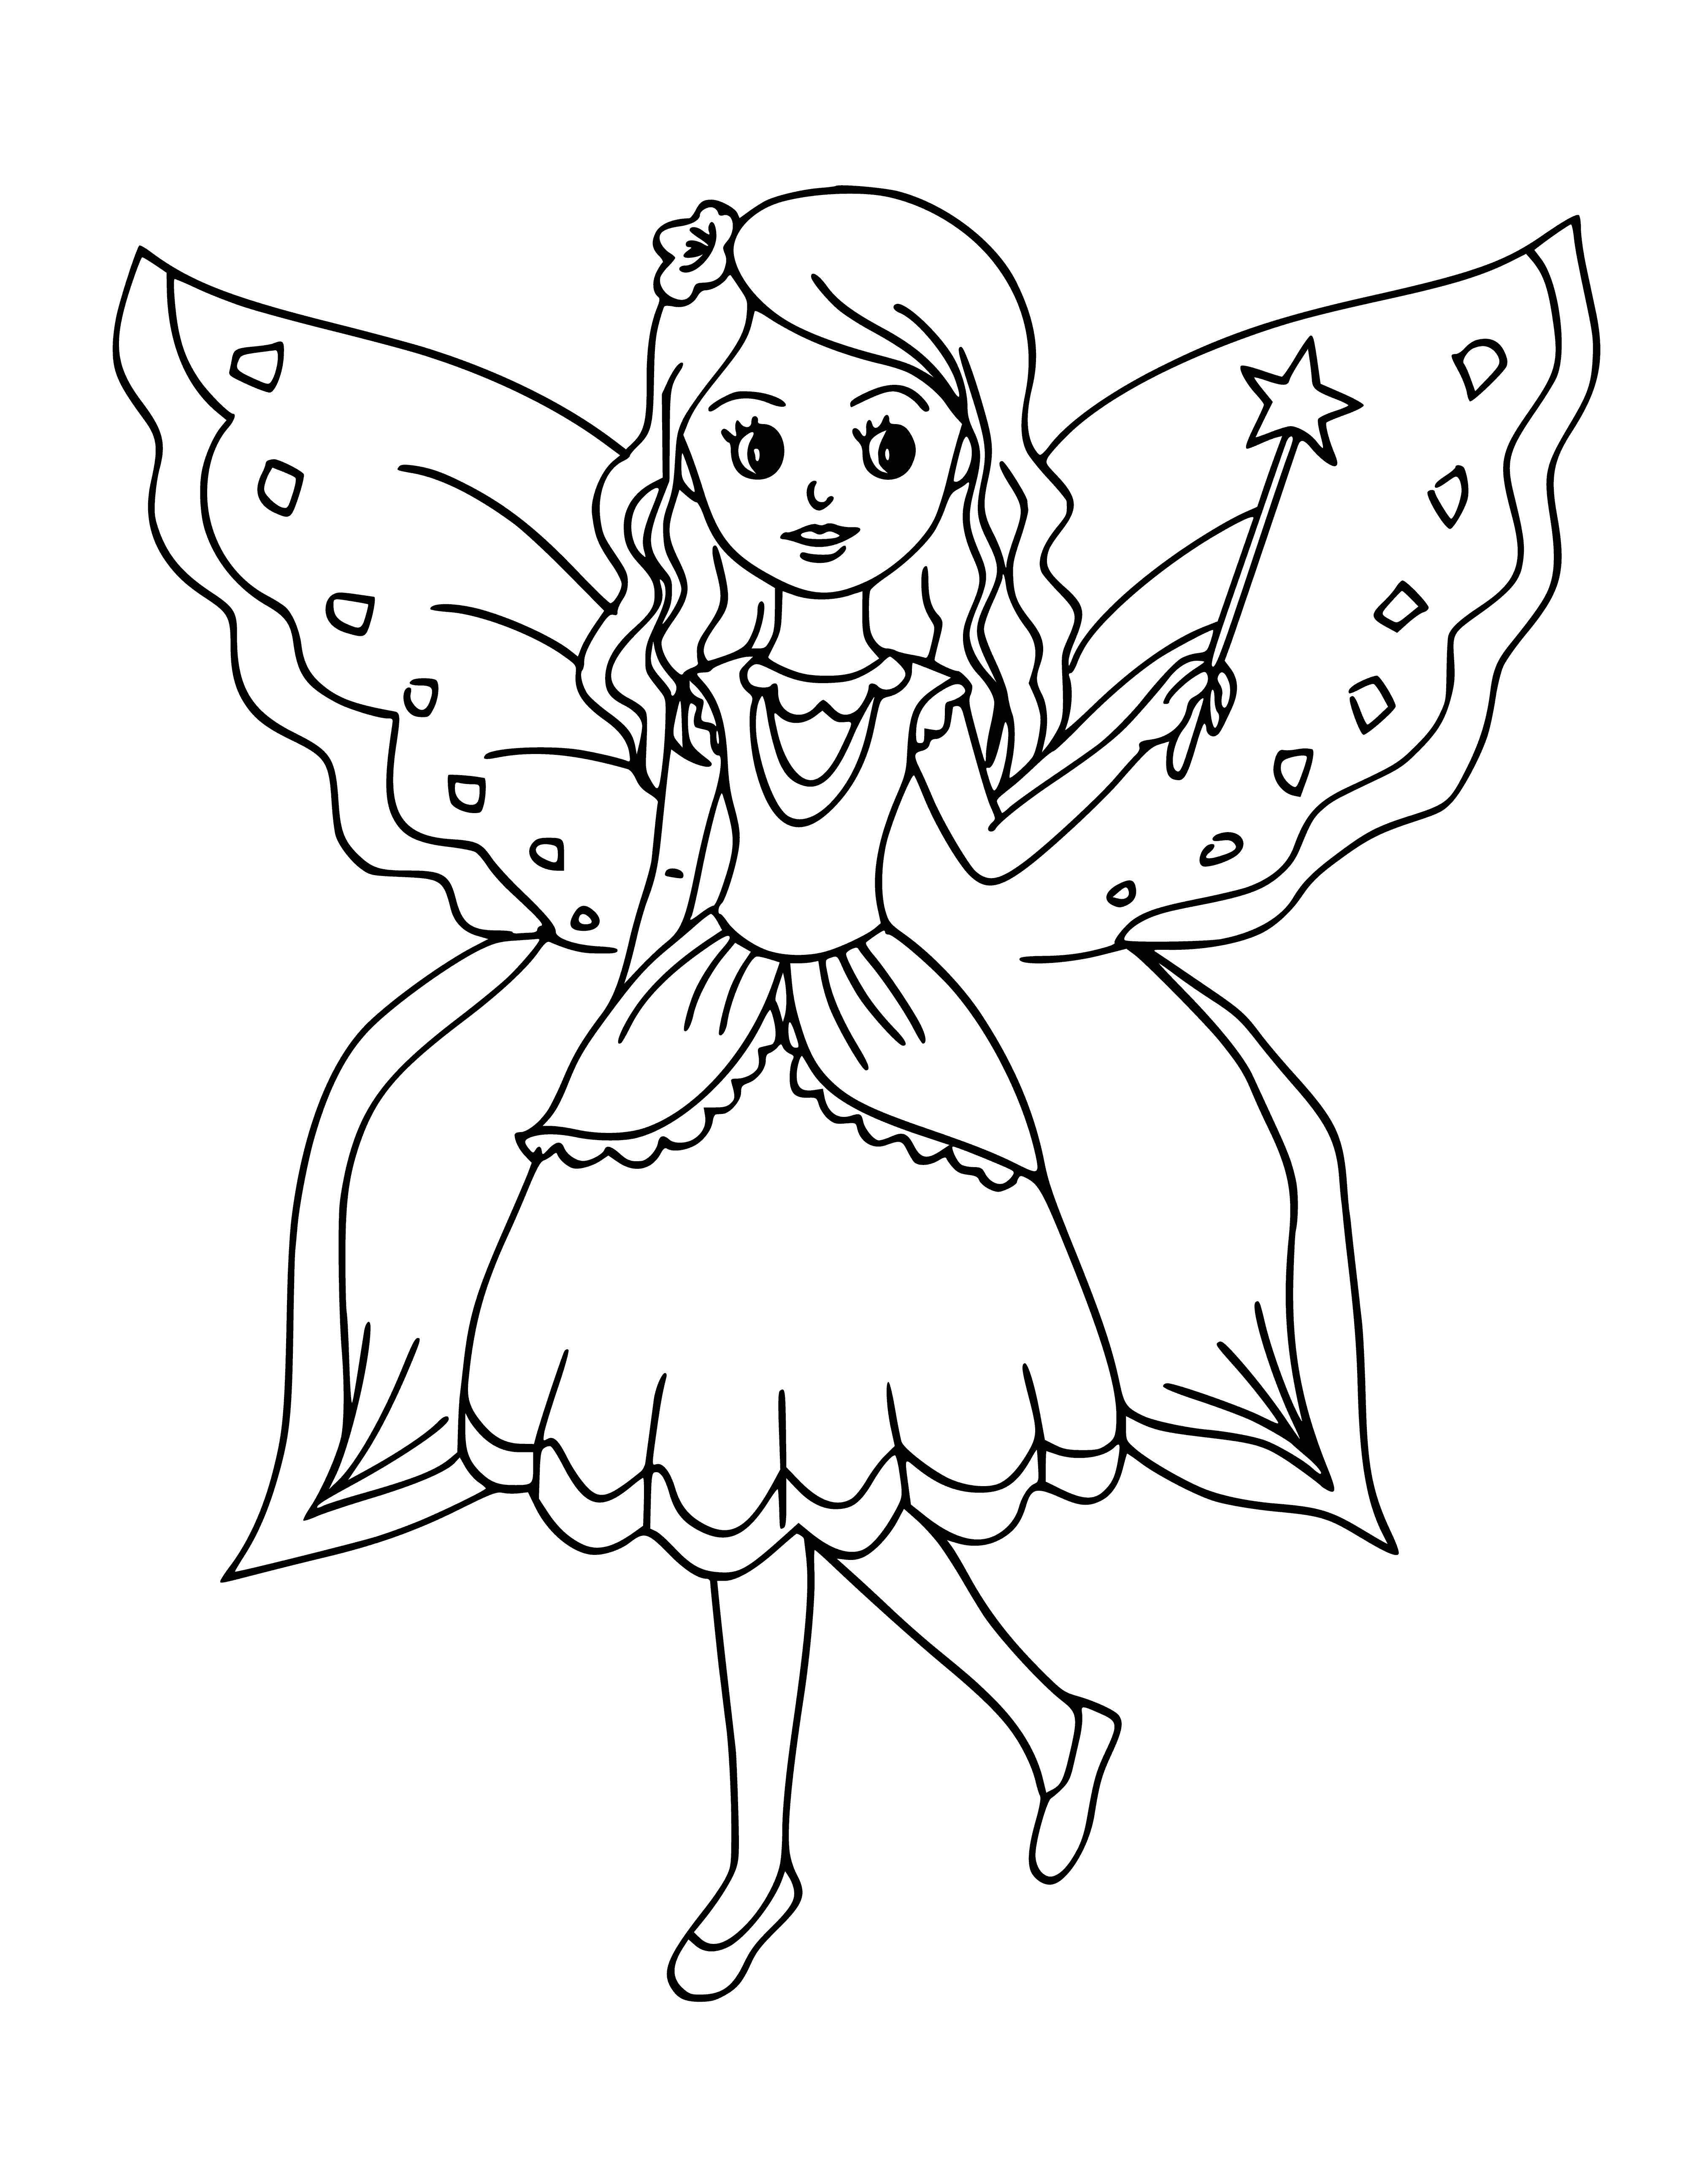 coloring page: A fairy wears a green dress and carries a wand, with pointy ears and wings, happily surrounded by butterflies.